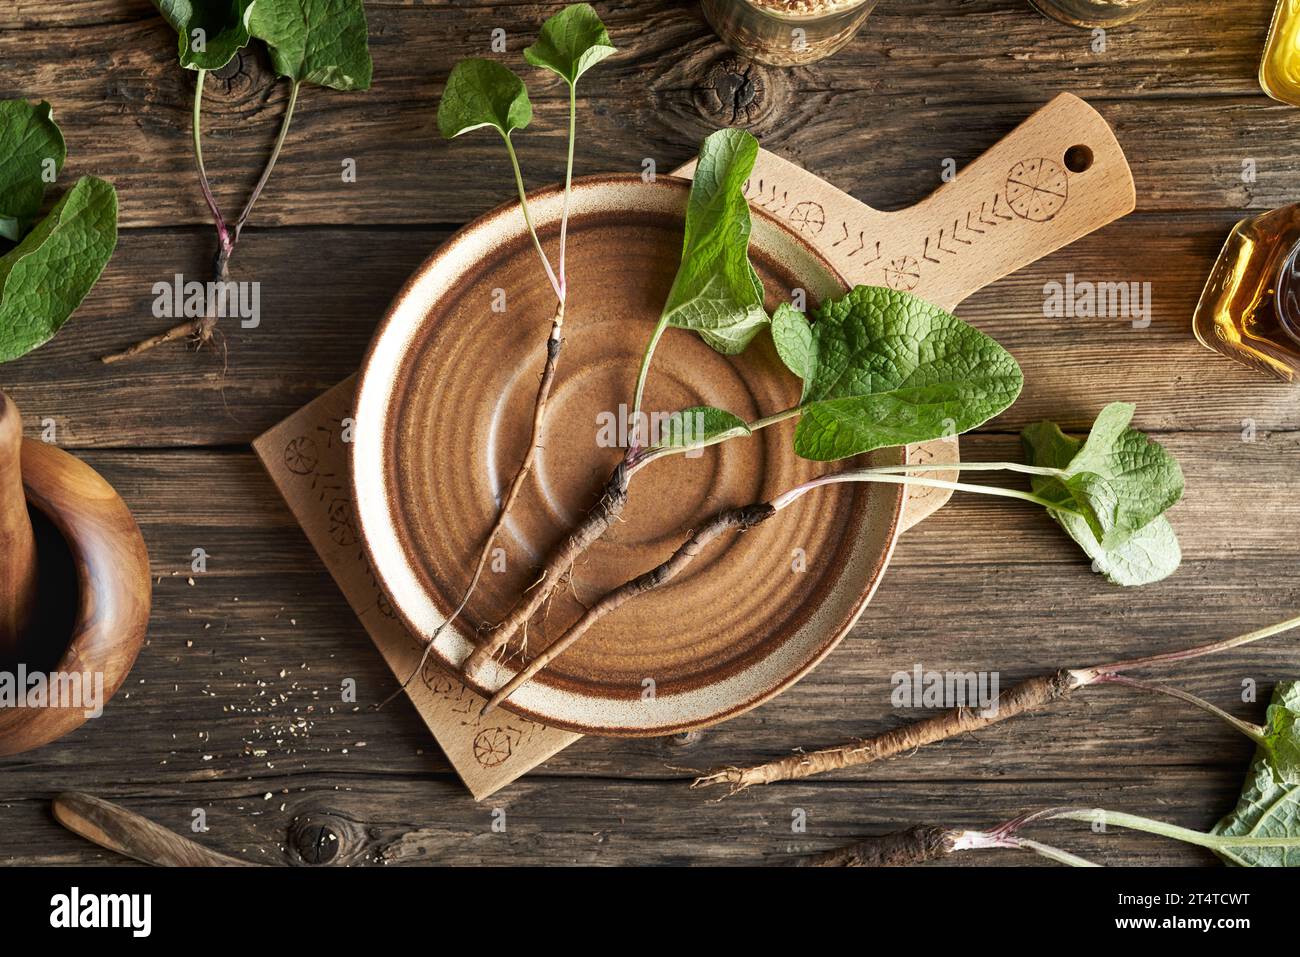 Burdock root on a plate on a table, top view Stock Photo